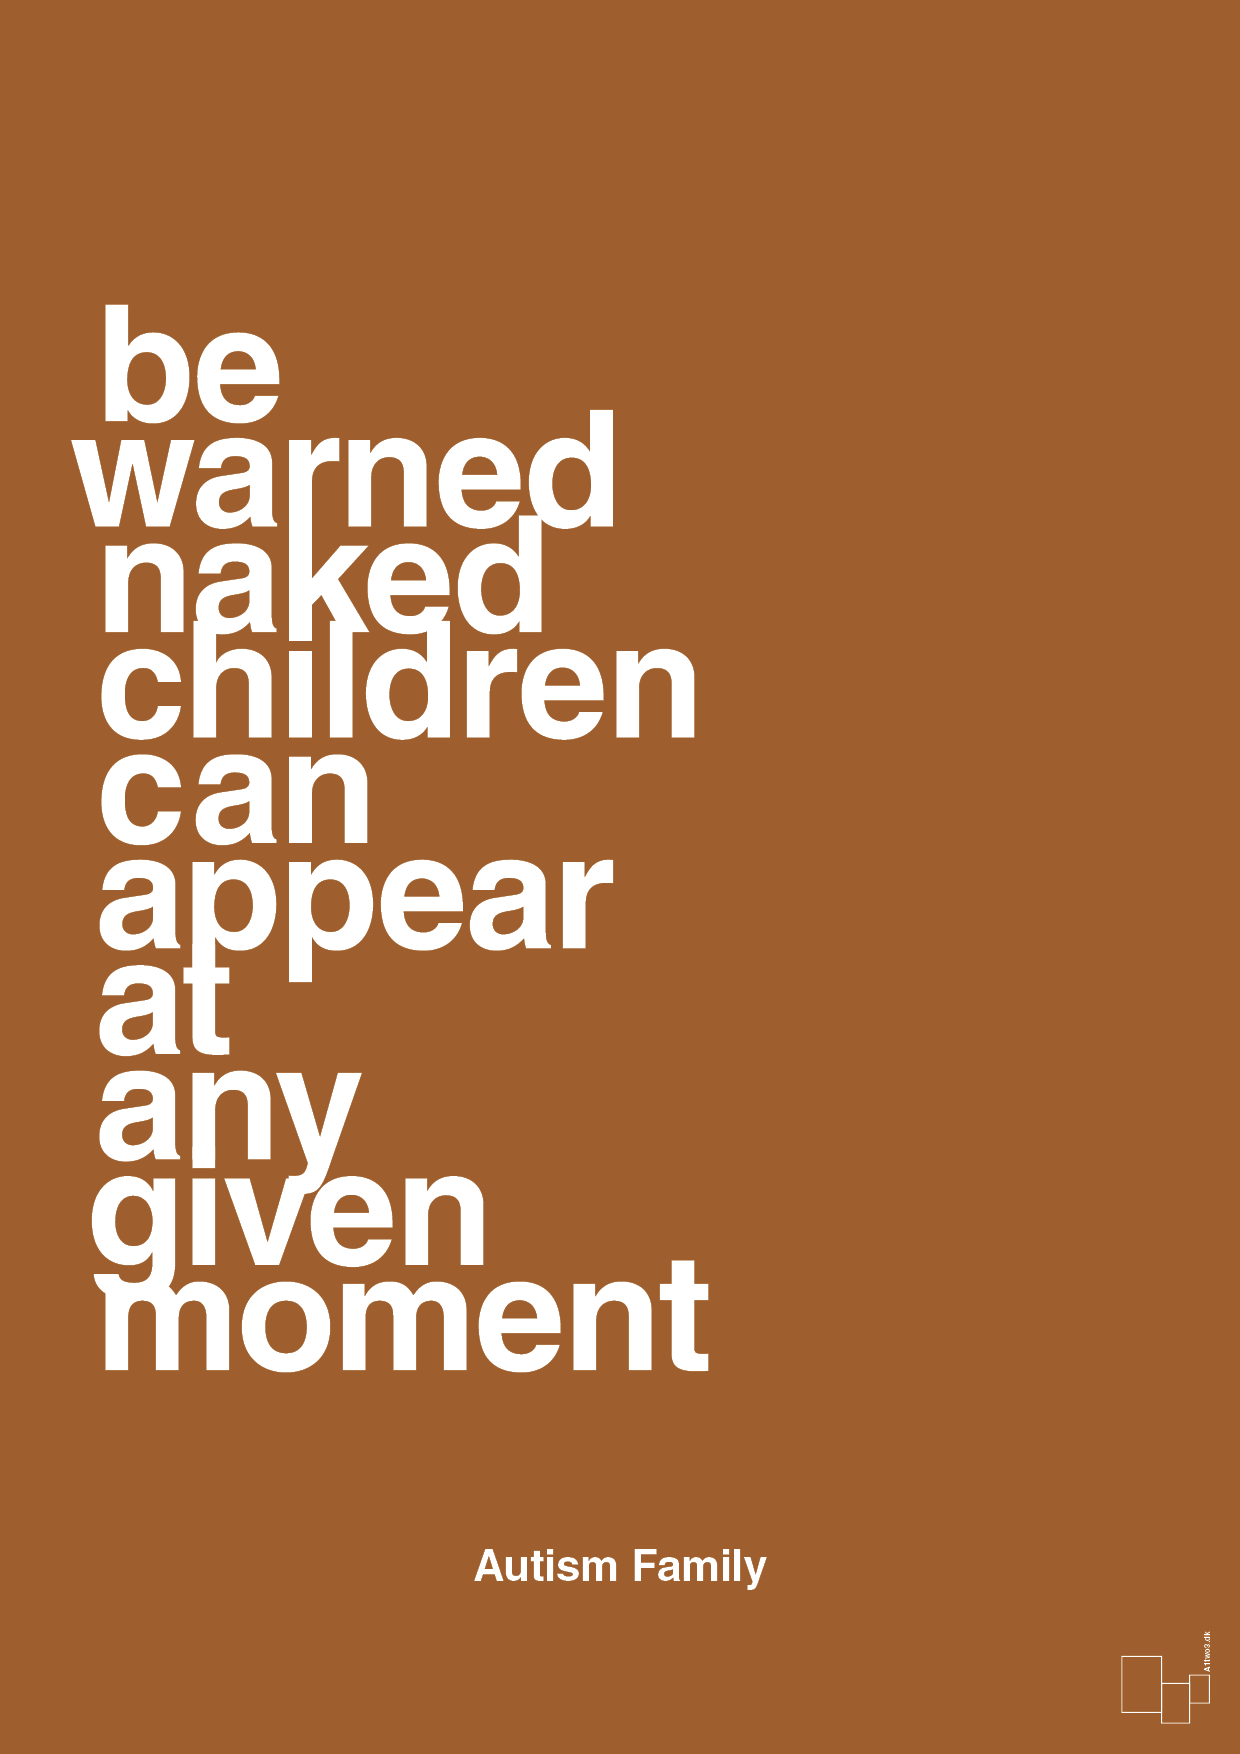 be warned naked children can appear at any given moment - Plakat med Samfund i Cognac